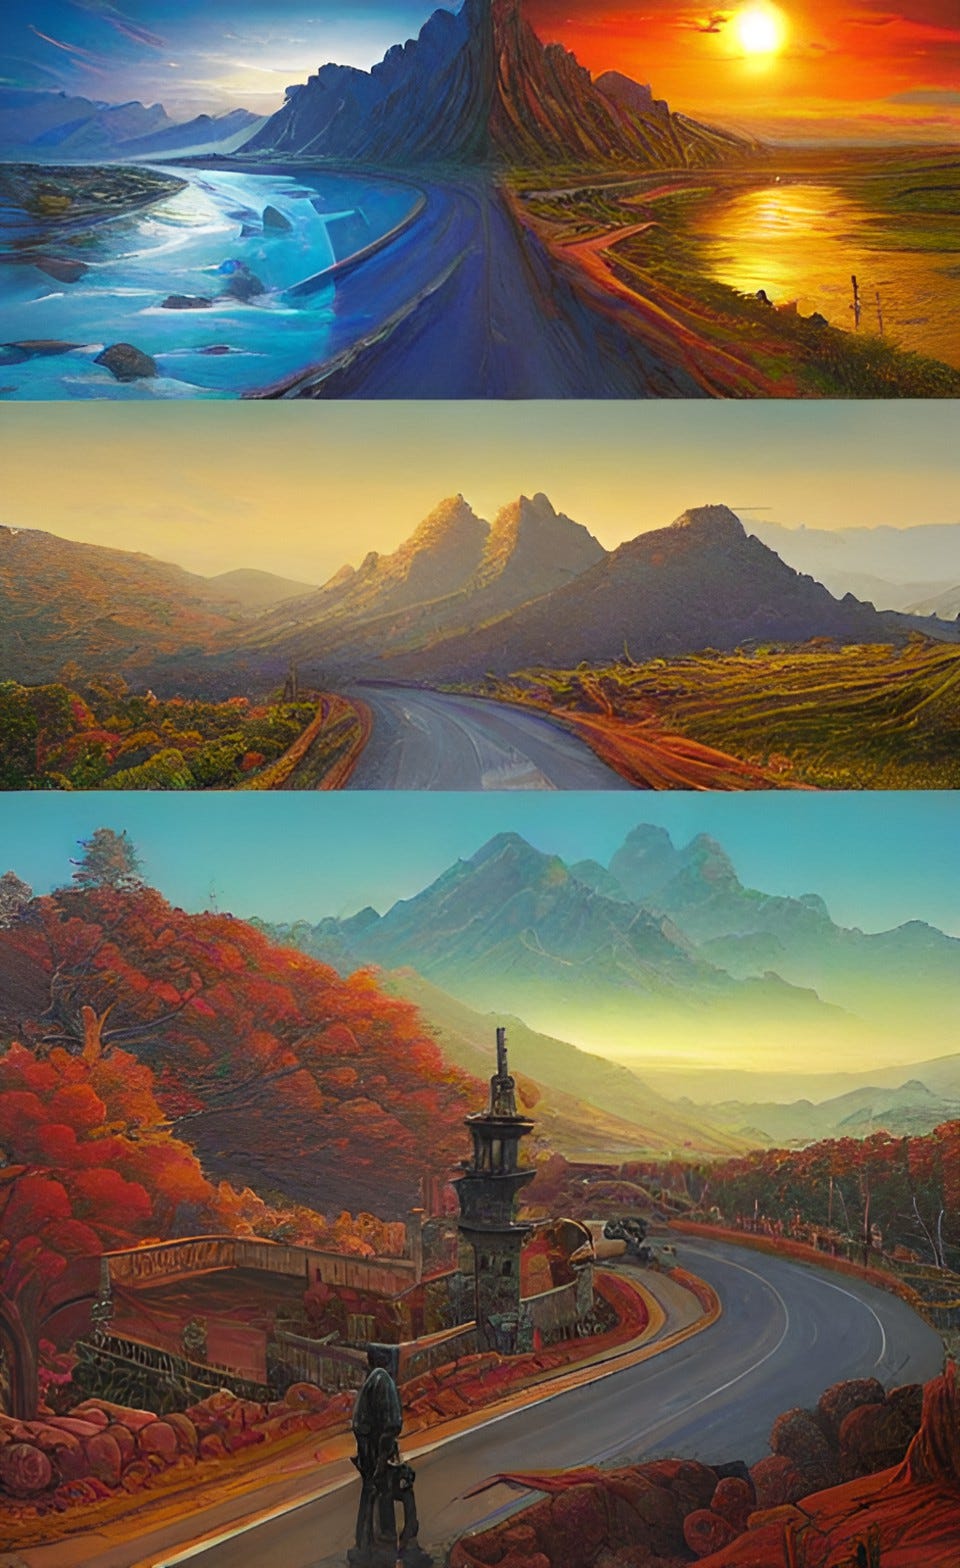 A.I. image of three vistas depicting a pathway to a mountain range, done in a comic book style